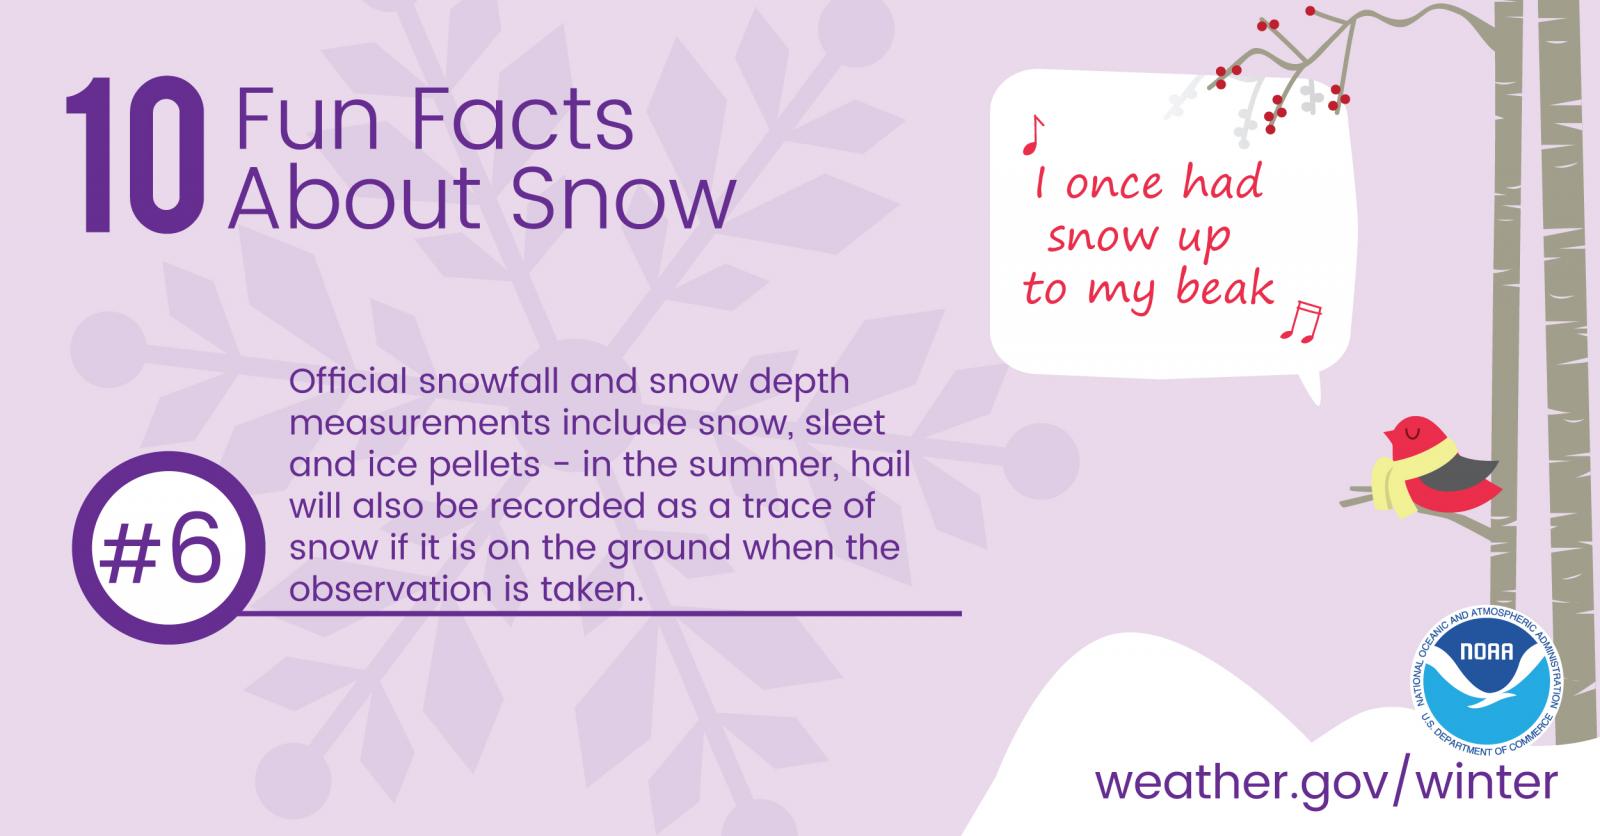 10 Fun Facts About Snow: #6. Official snowfall and snow depth measurements include snow, sleet and ice pellets - in the summer, hail will also be recorded as a trace of snow if it is on the ground when the observation is taken.